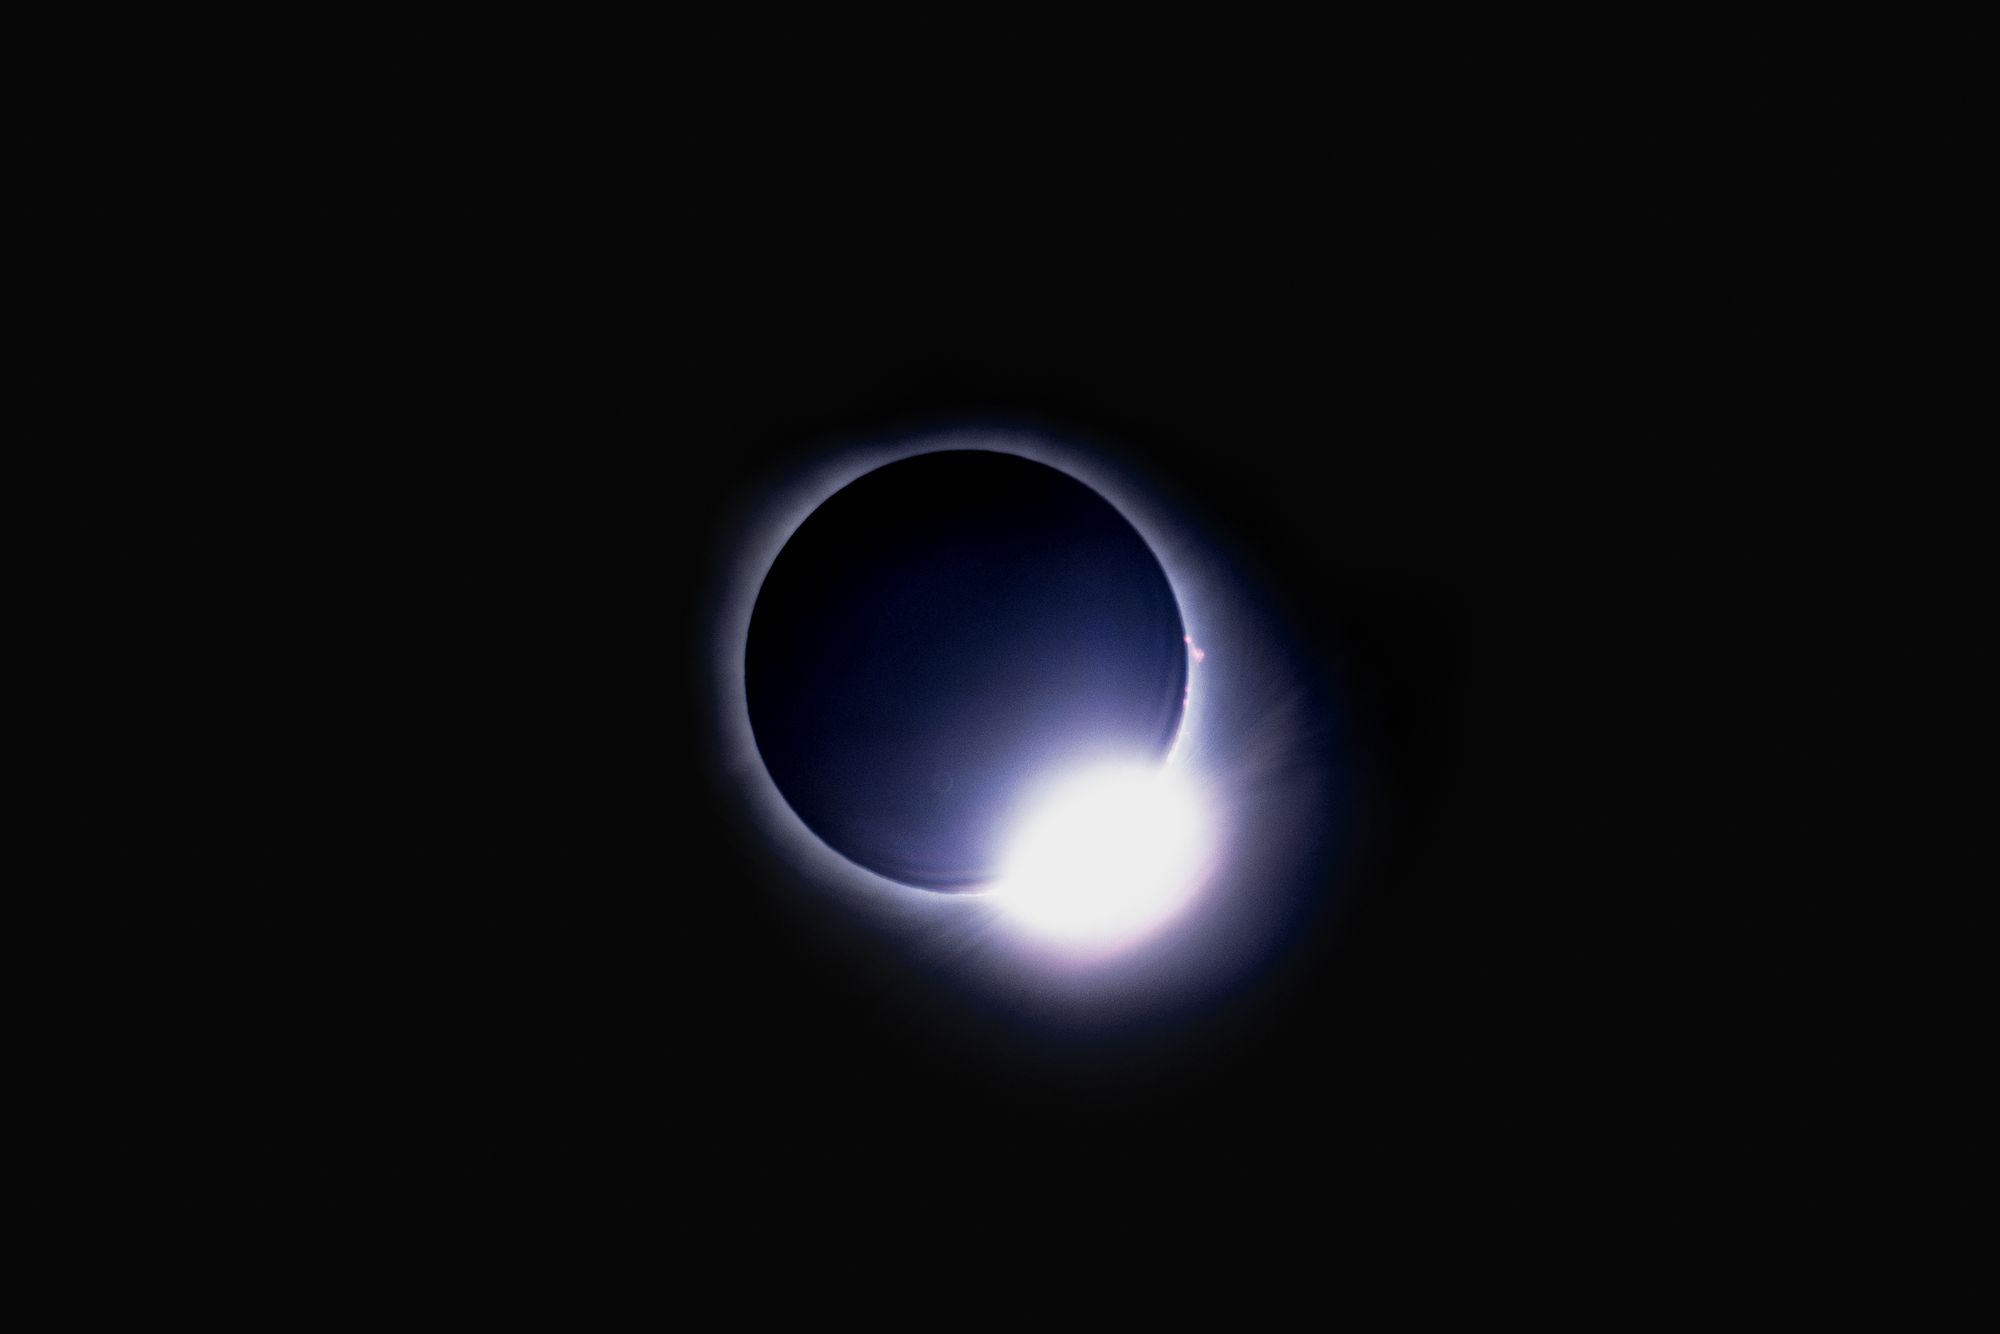 The "diamond ring" of the solar eclipse, a flare of light seen at the bottom right corner